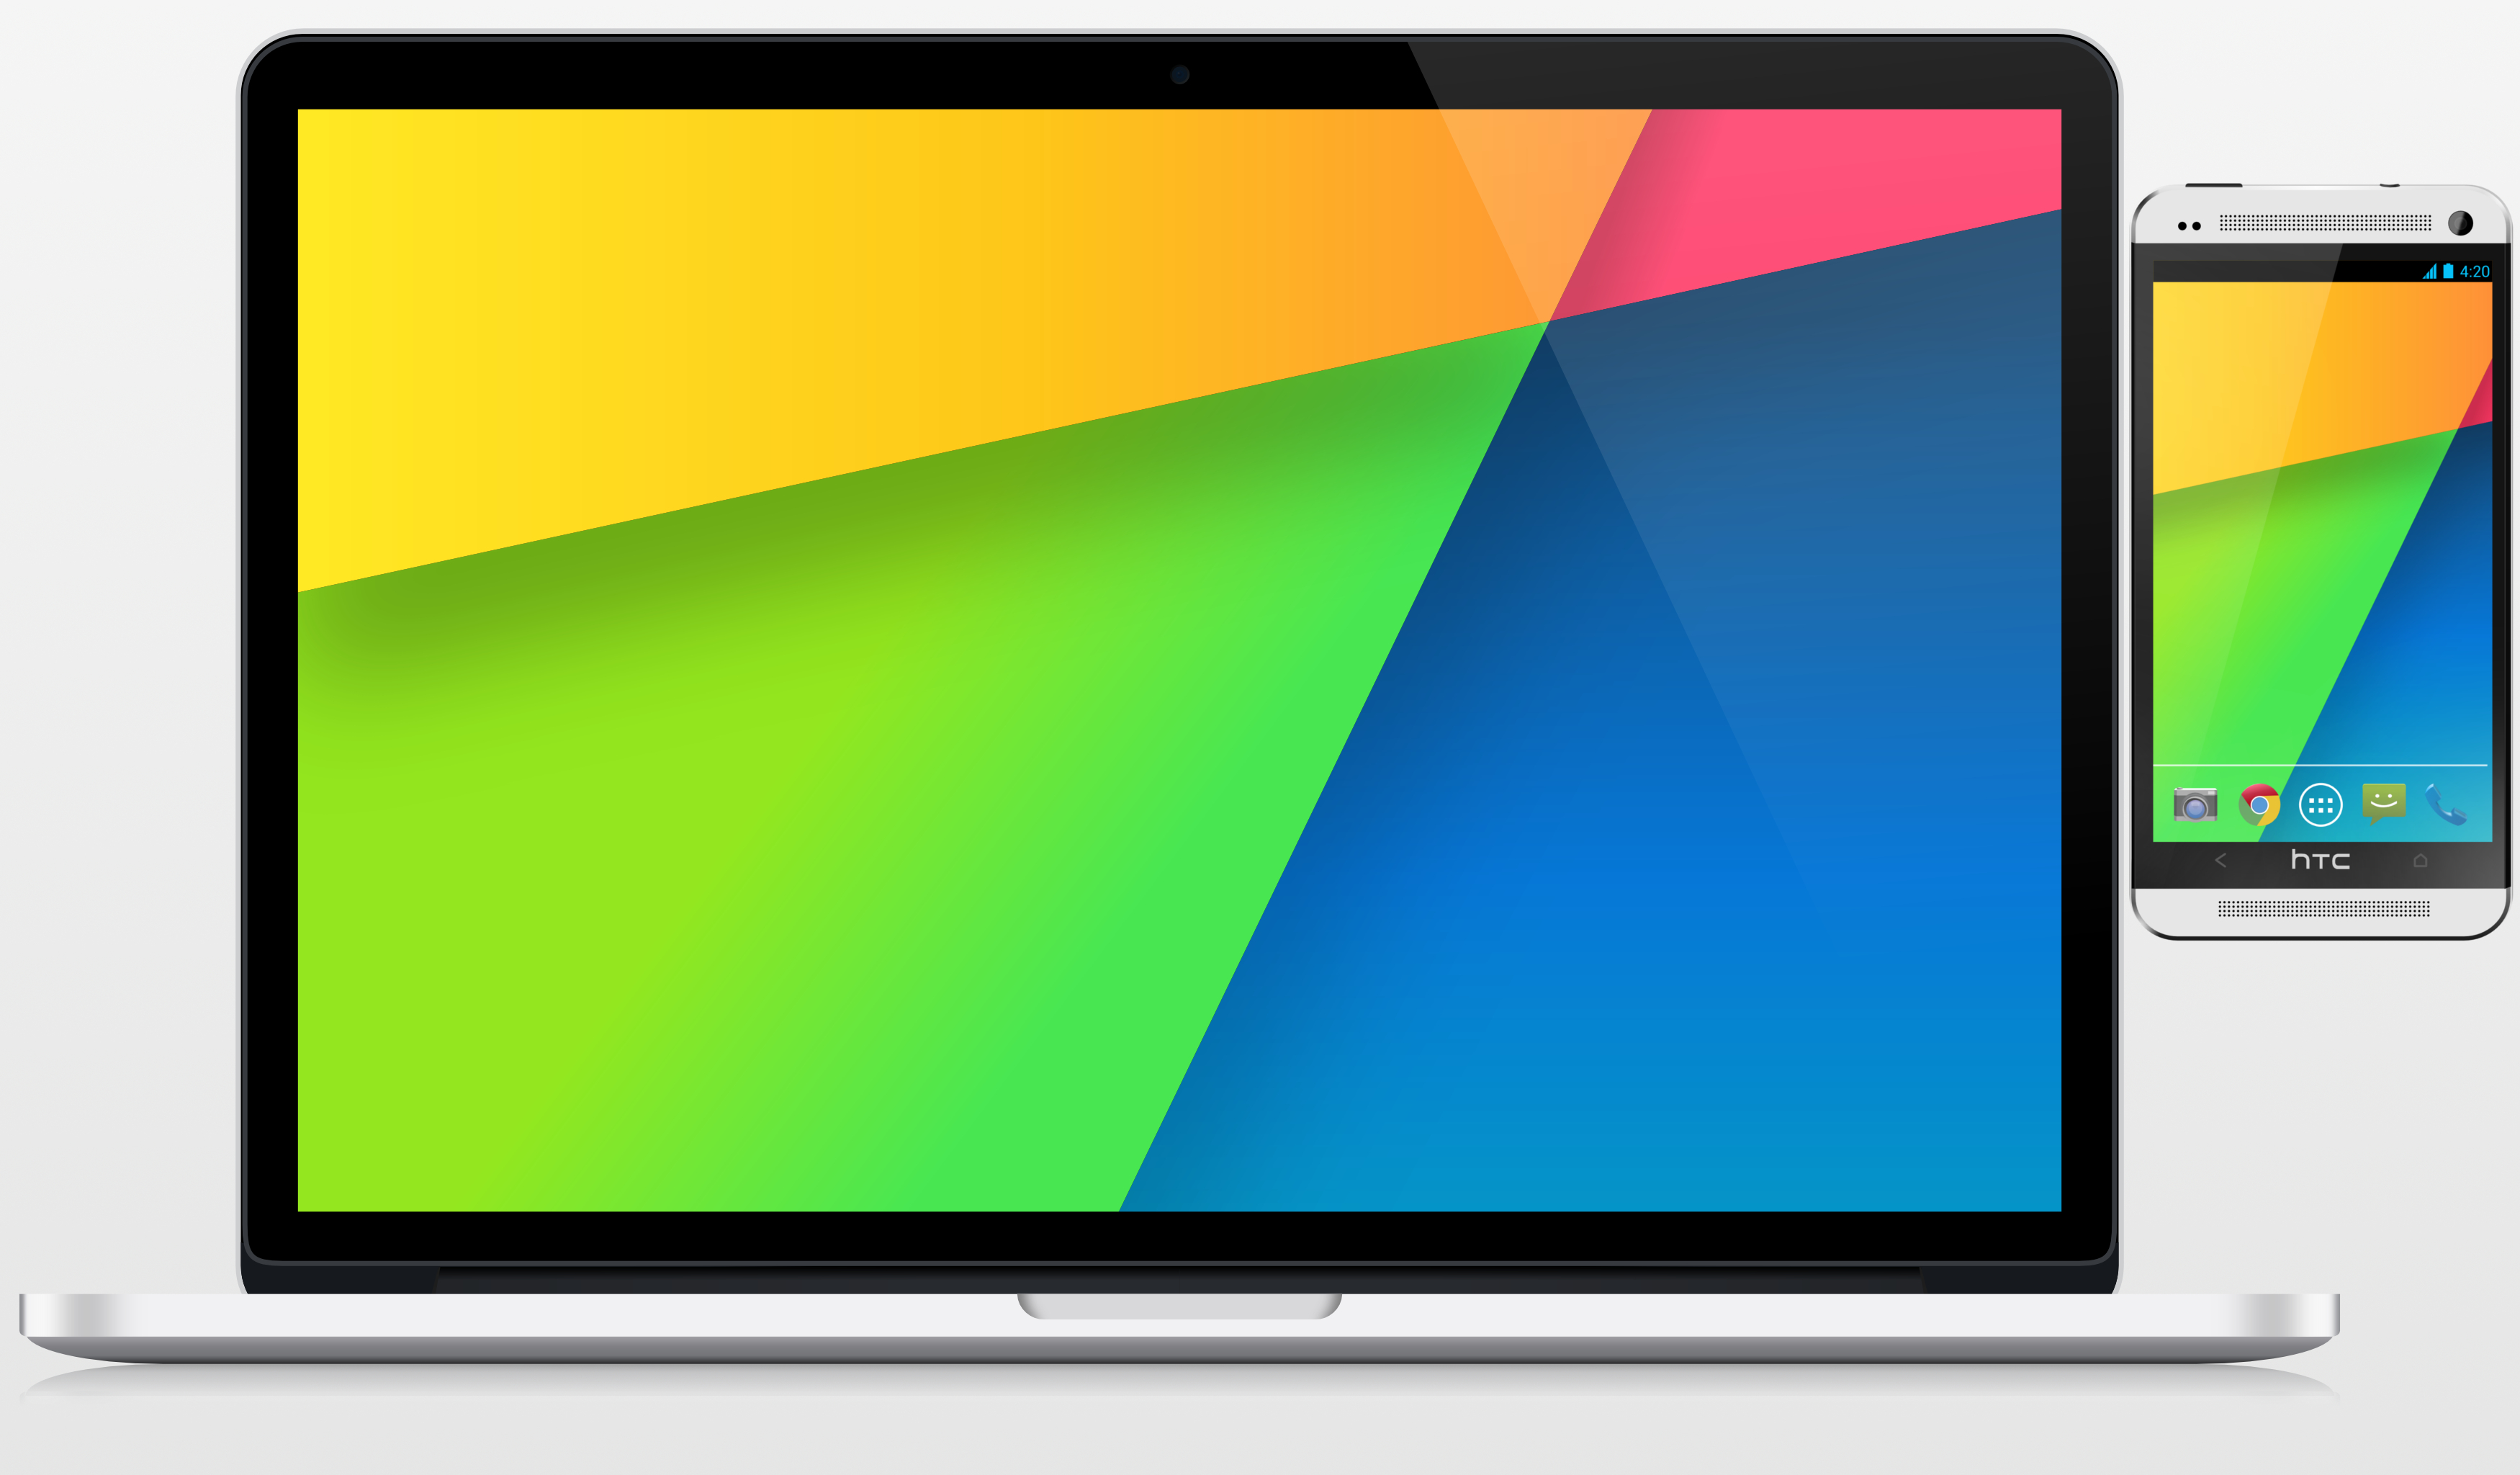 Android 4.3 Stock Nexus (7) wallpaper Pack by TheGoldenBox ...